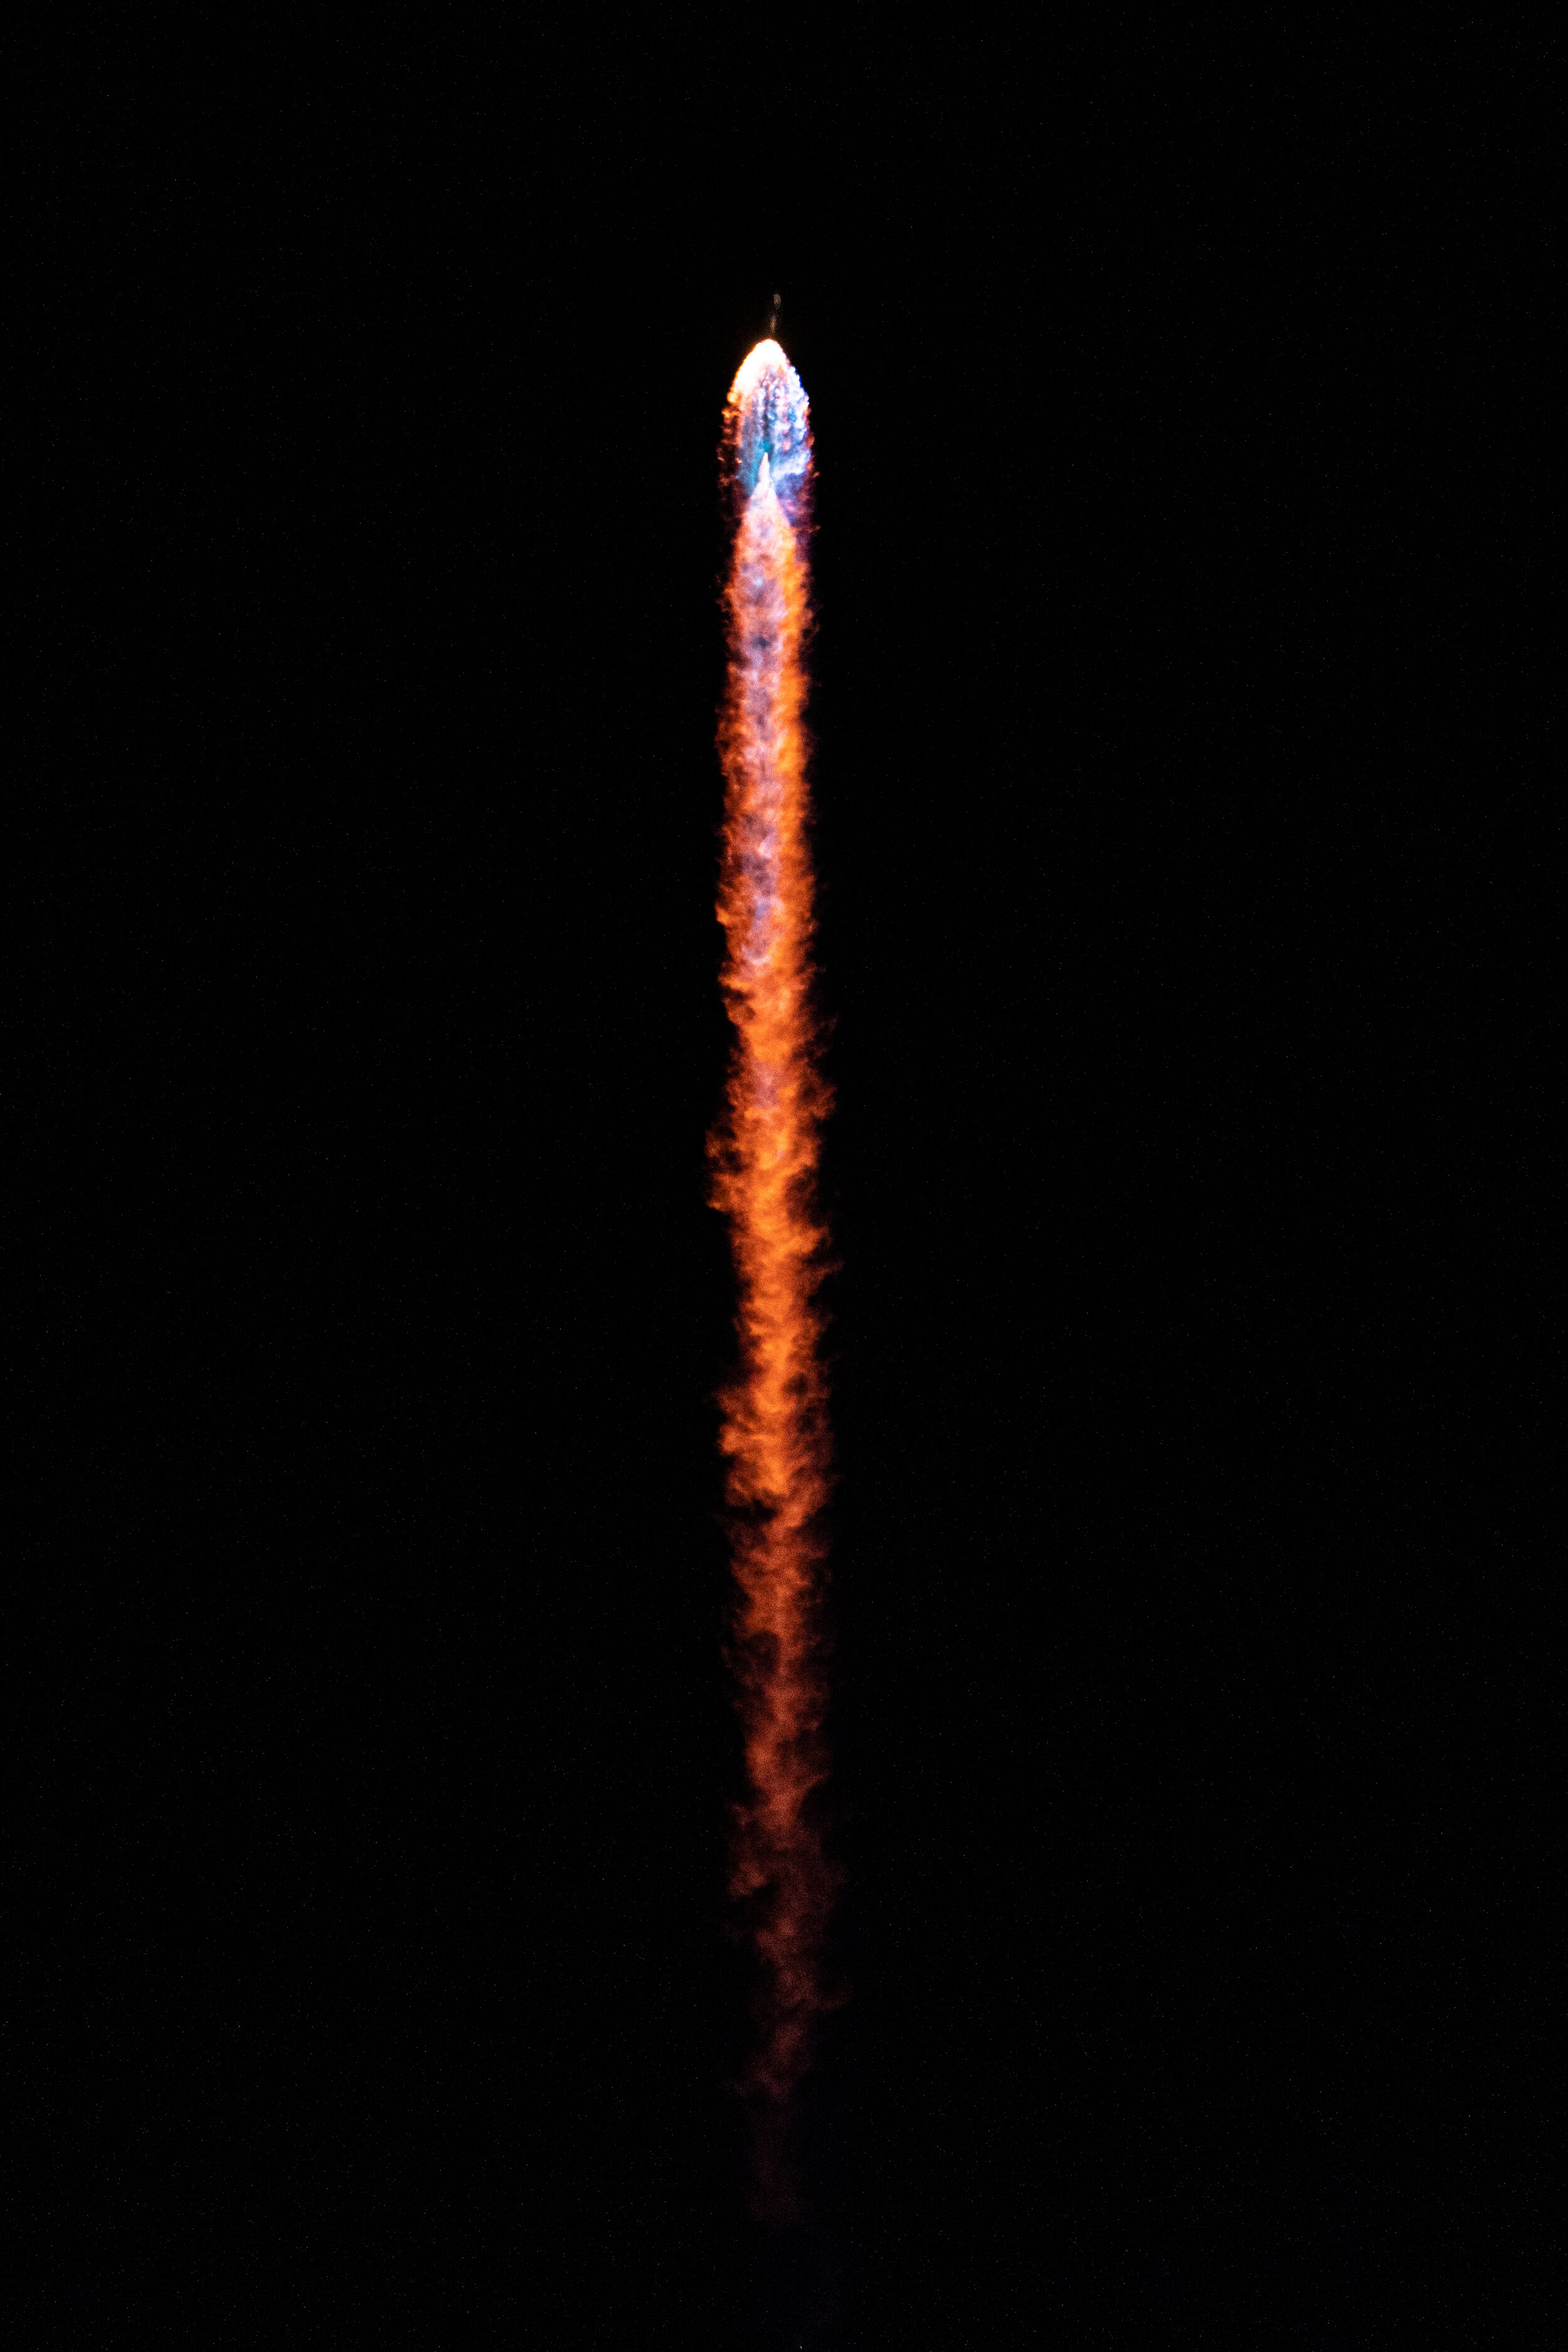 SpaceX Falcon 9 Departing Vandenberg A.F.B.